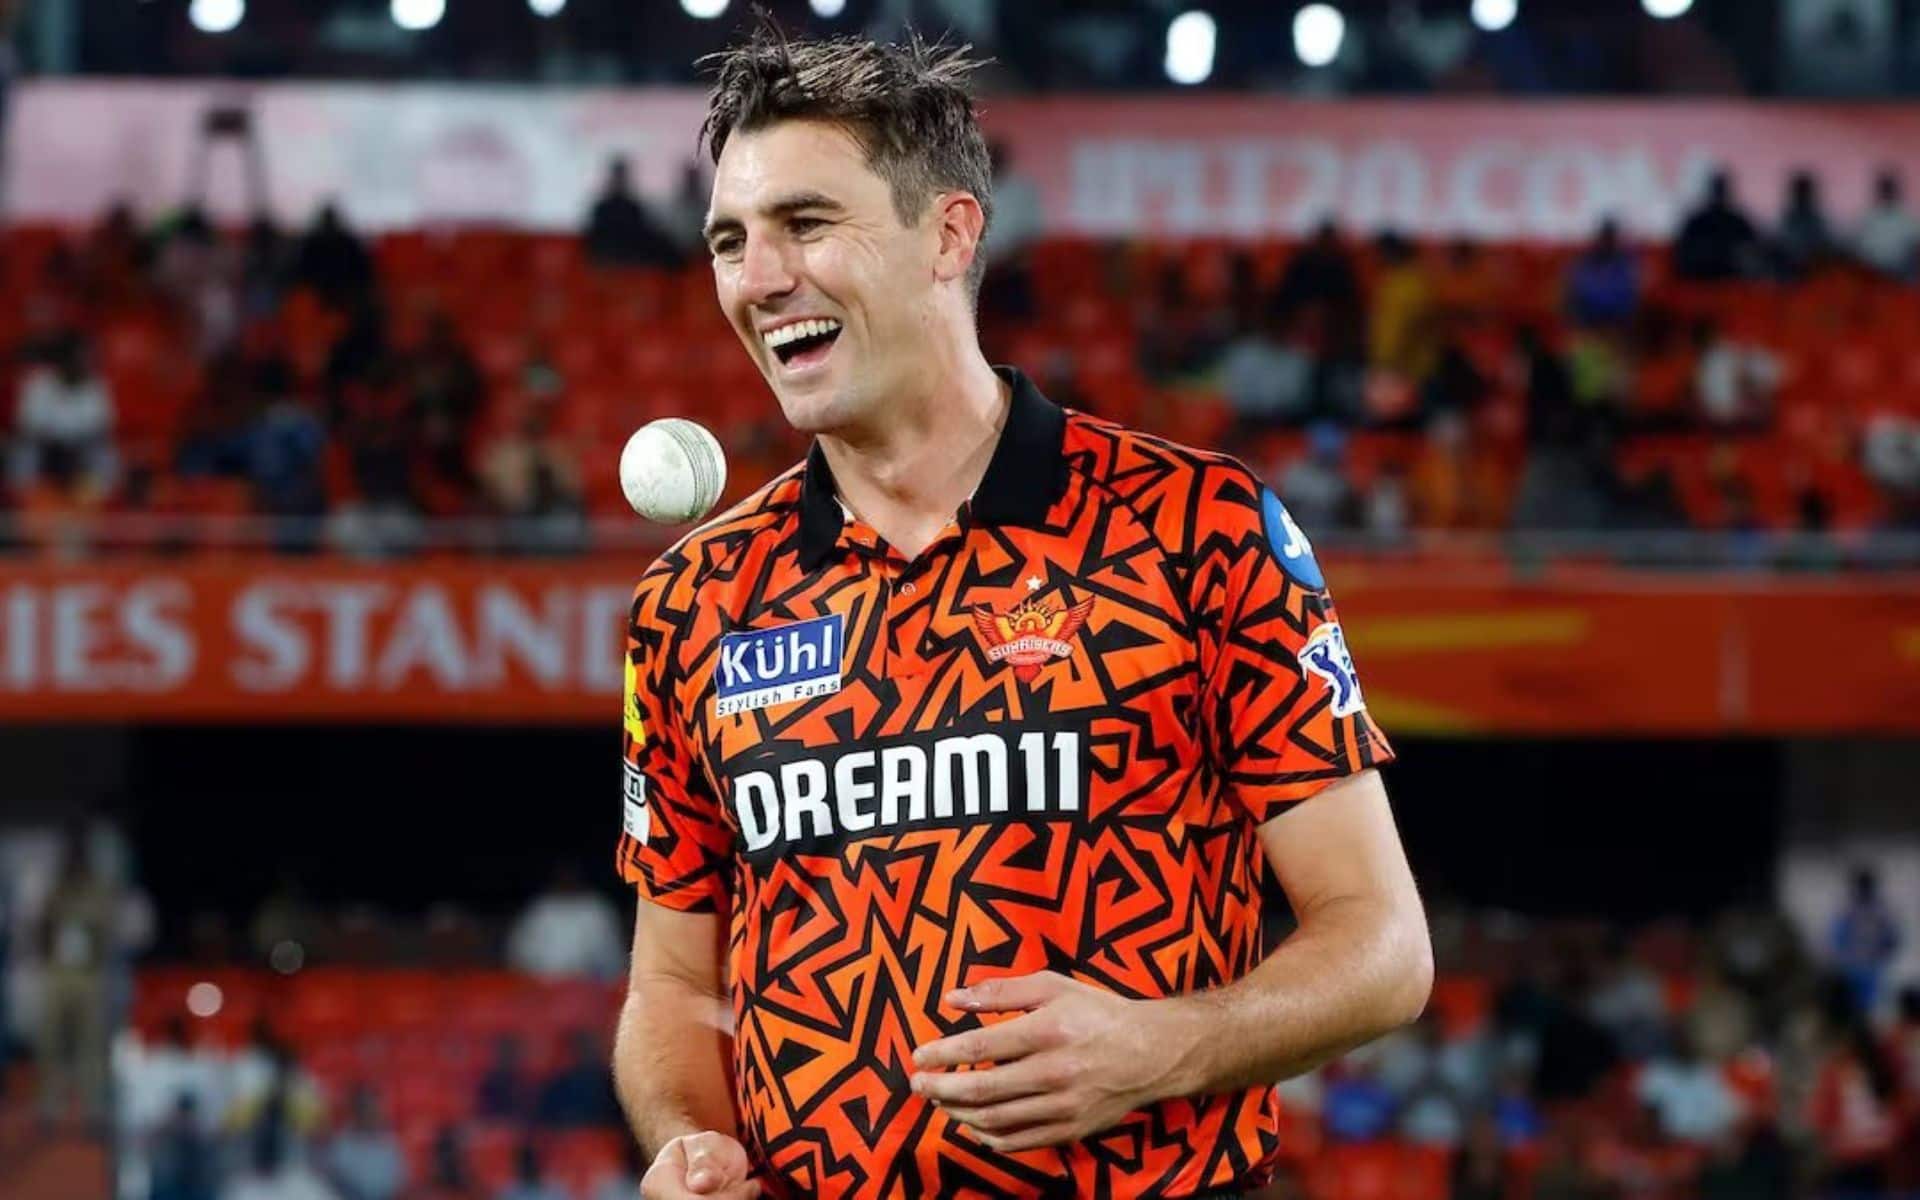 Pat Cummnins was appointed the captain of SRH (x.com)